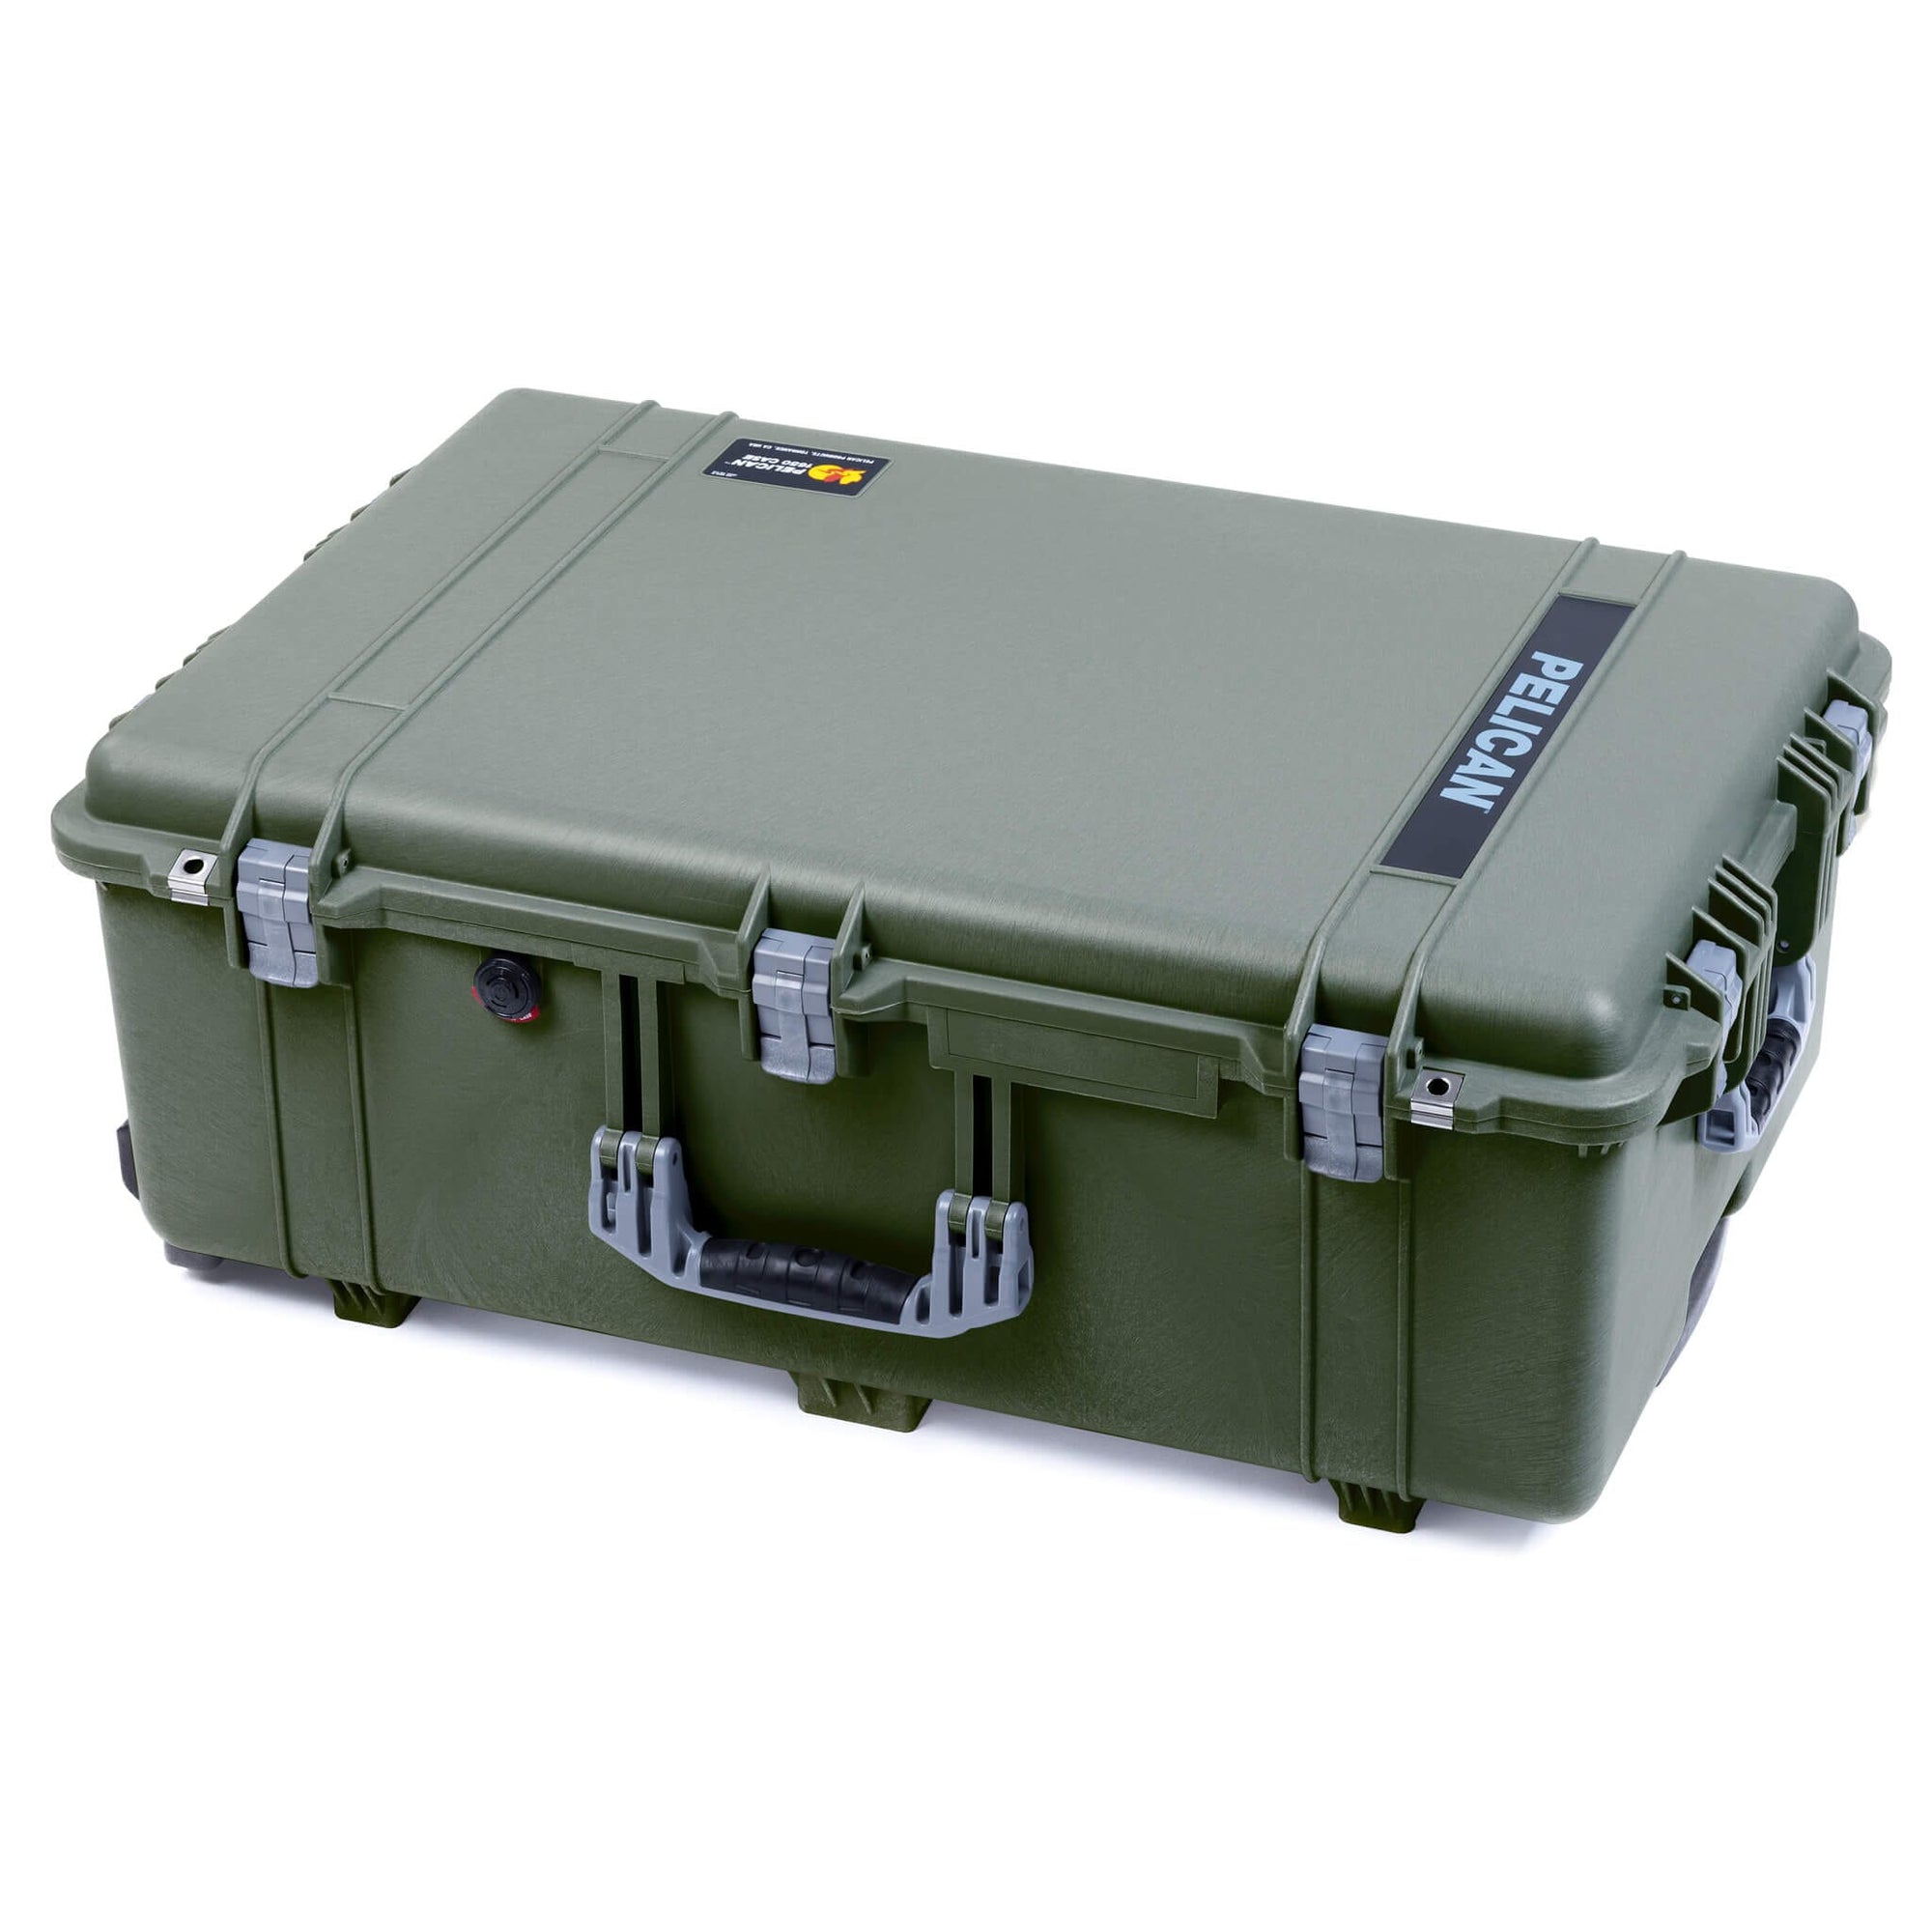 Pelican 1650 Case, OD Green with Silver Handles & Latches ColorCase 